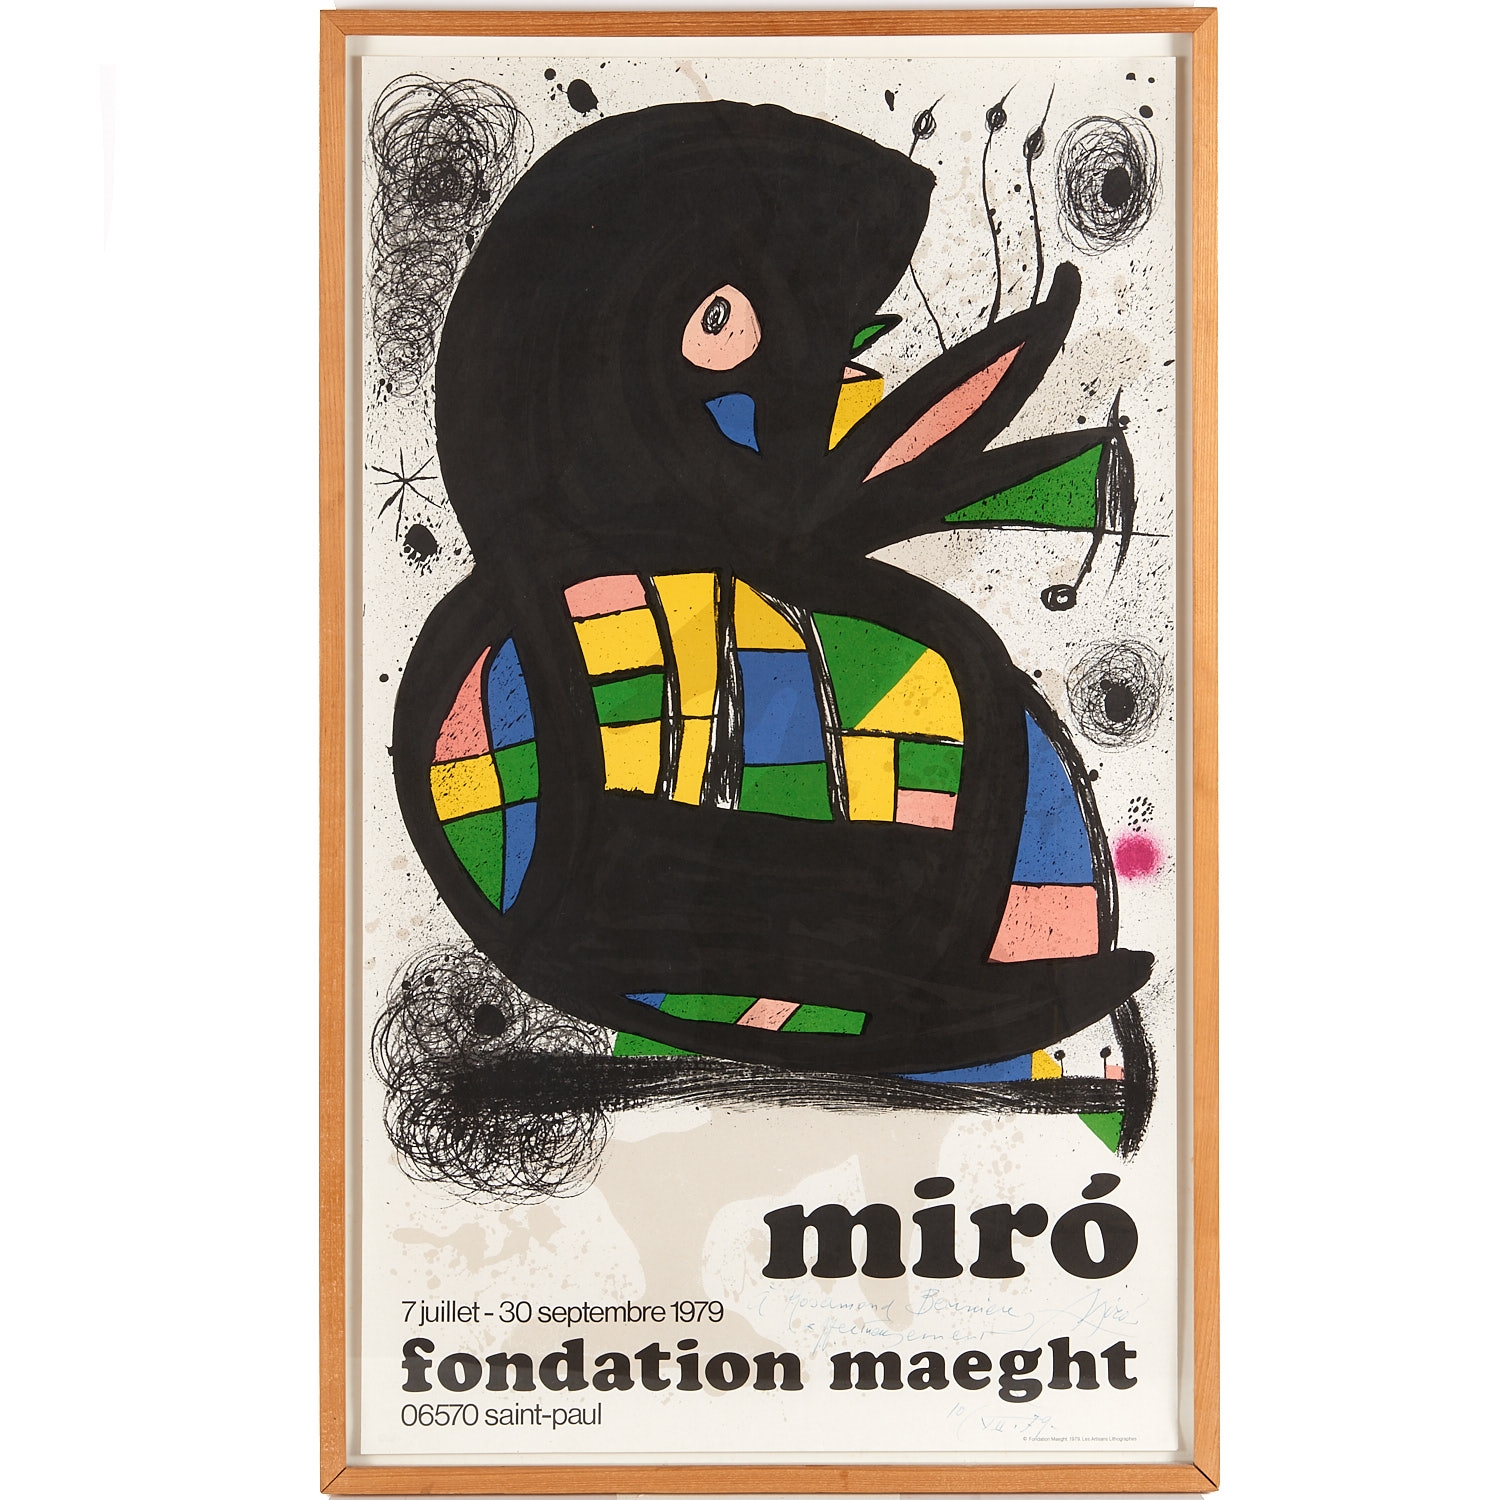 poster by Joan Miró, 1979